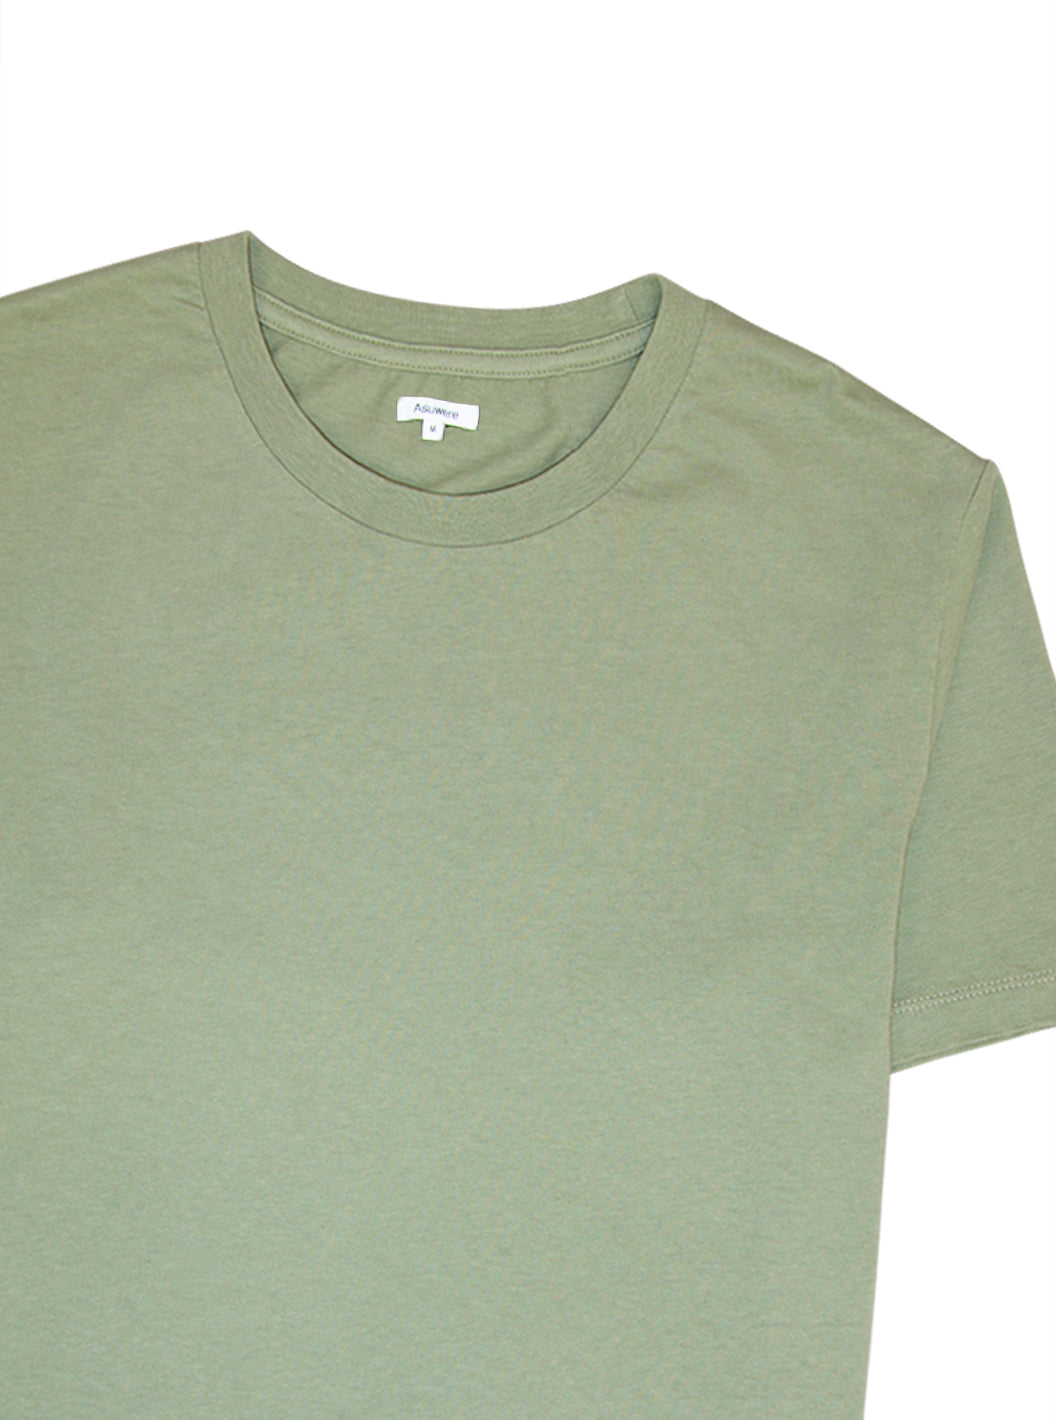 Recycled Cotton Tee - Sage